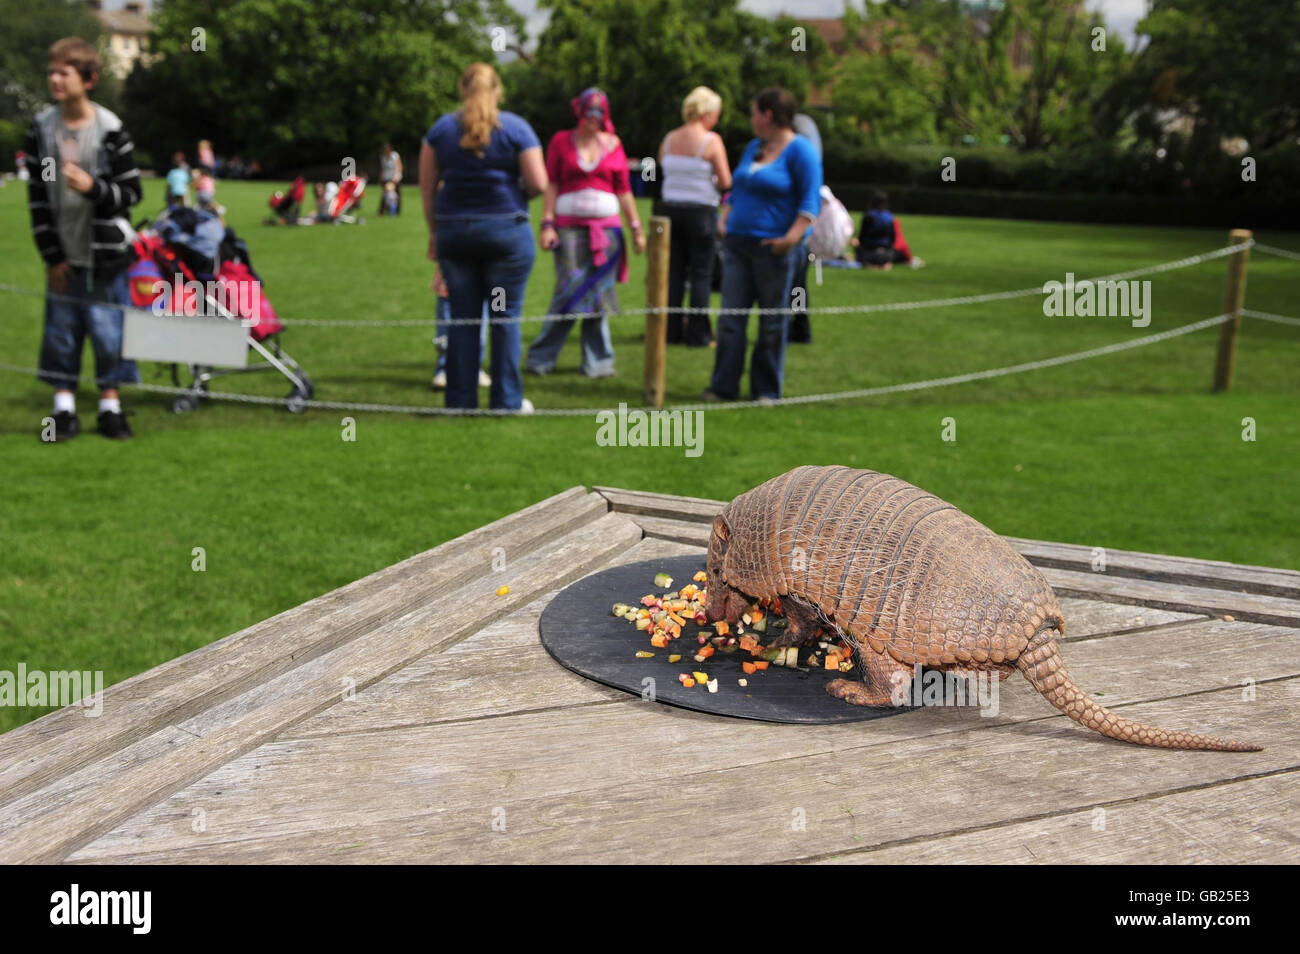 Two-year-old Archie, a six-banded South American armadillo is the newest member of Bristol Zoo's expanding group of animals taking part in the daily Amazing Animals displays on the main lawn. Stock Photo